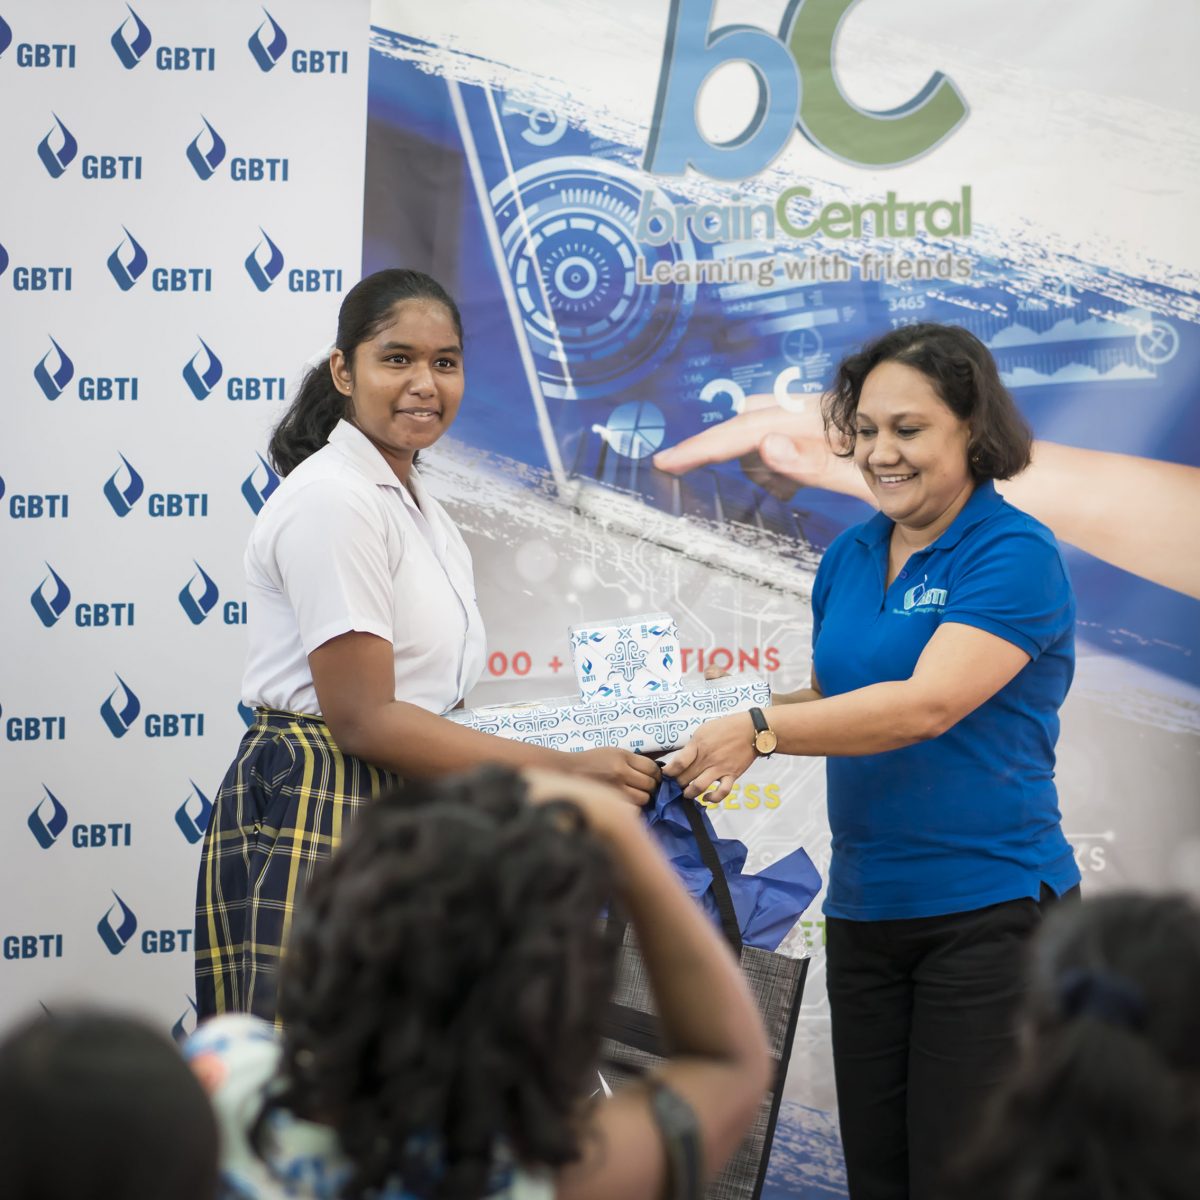 (Left) Renika Anand receiving her prizes from GBTI’s Marketing & Communications Officer, Nadia De Abreu.